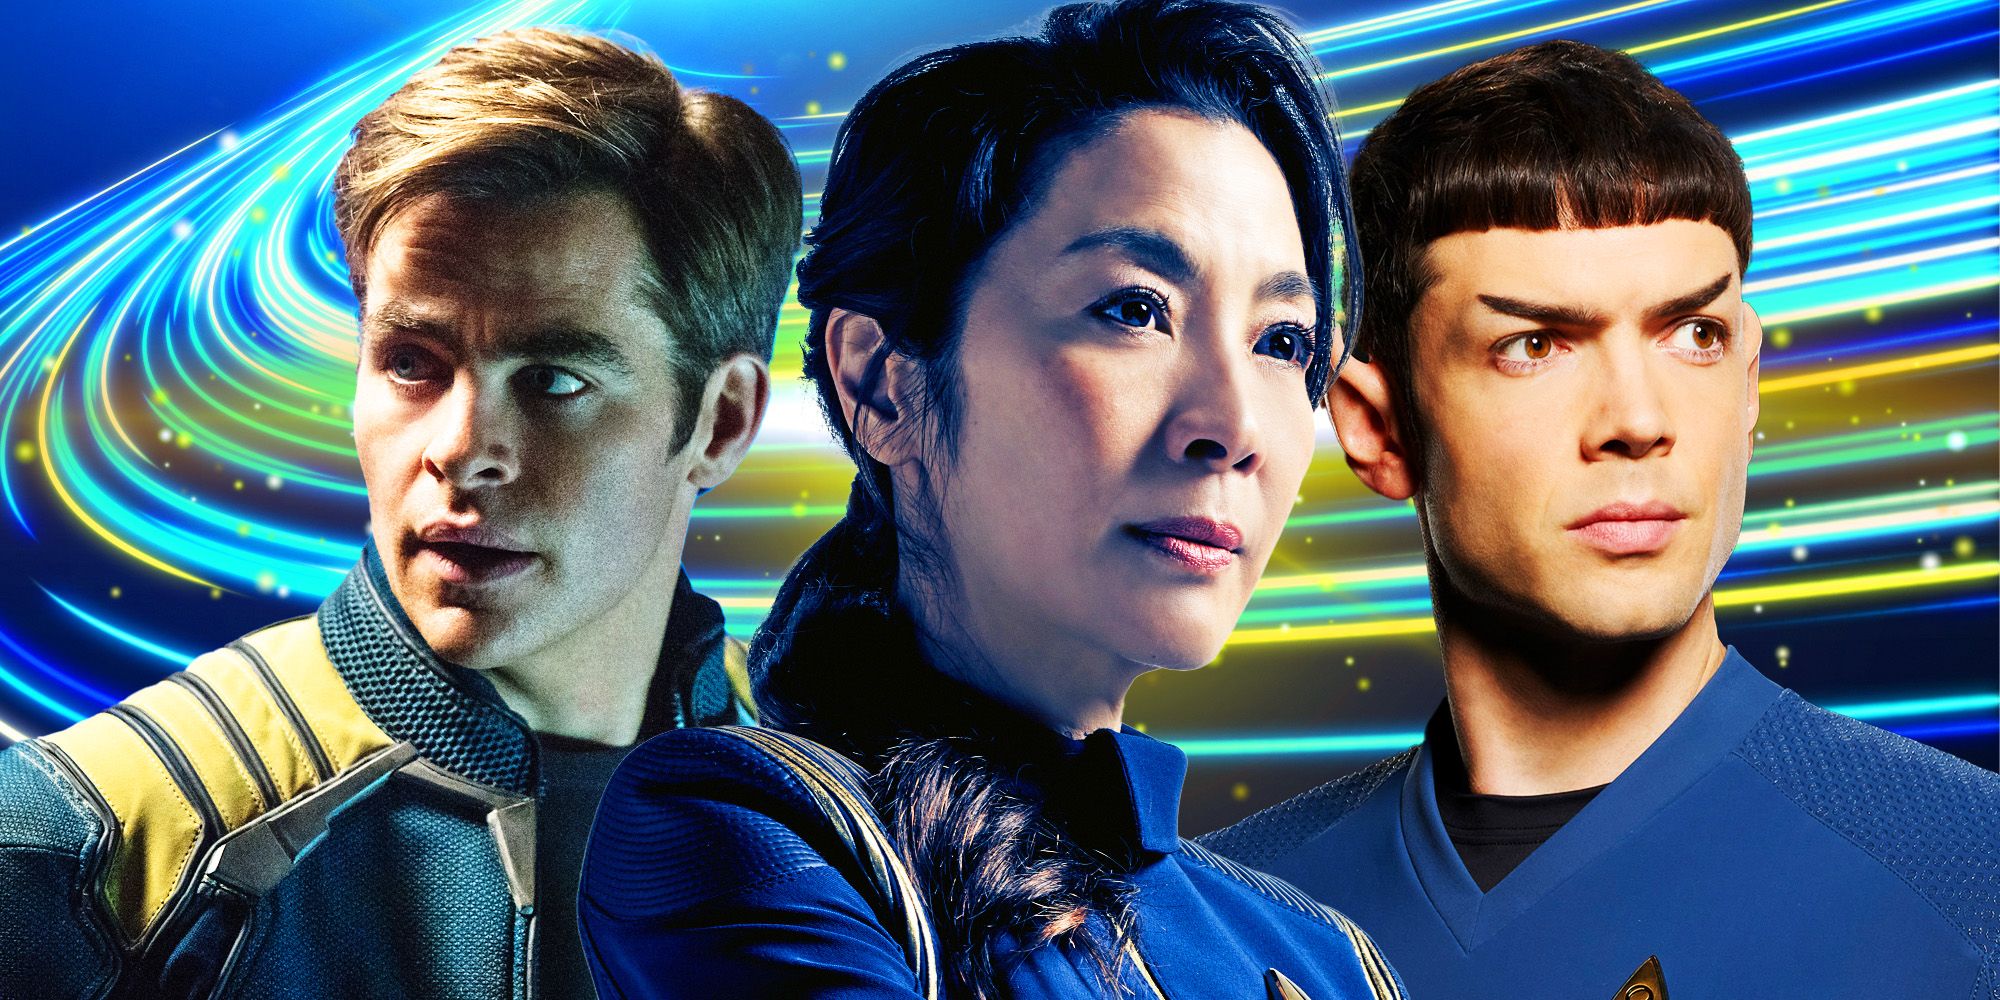 New Star Trek Movies Made For TV Could Happen According To New Report